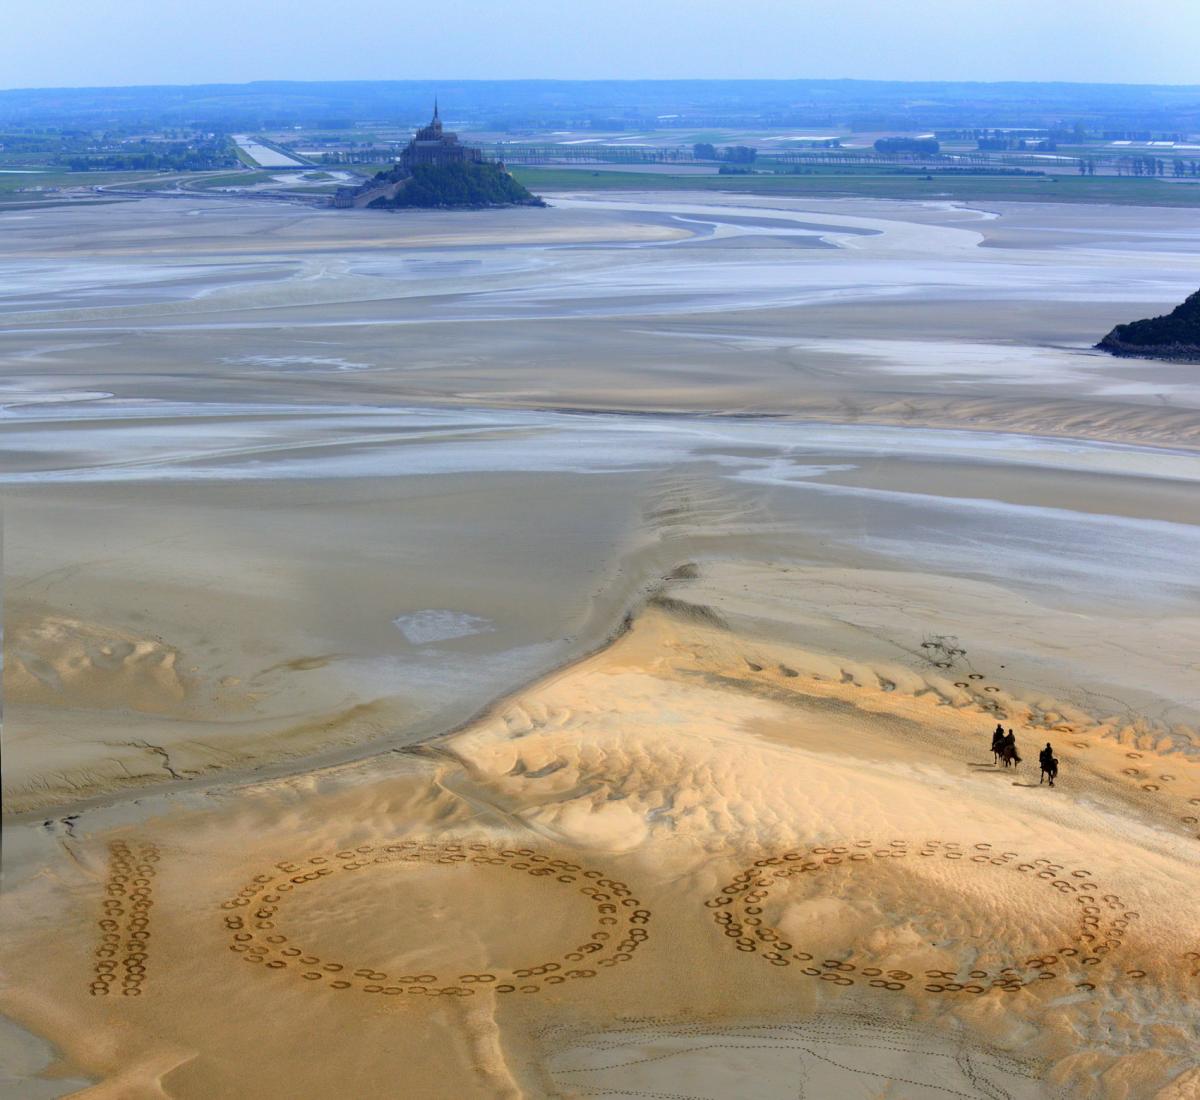 Giant 2.3m by 2.5m horse hoof prints created in the Bay of Mont-Saint-Michel by French artist and sand sculptor Christophe Dumont mark 100 days to the start of the Alltech FEI World Equestrian Games.